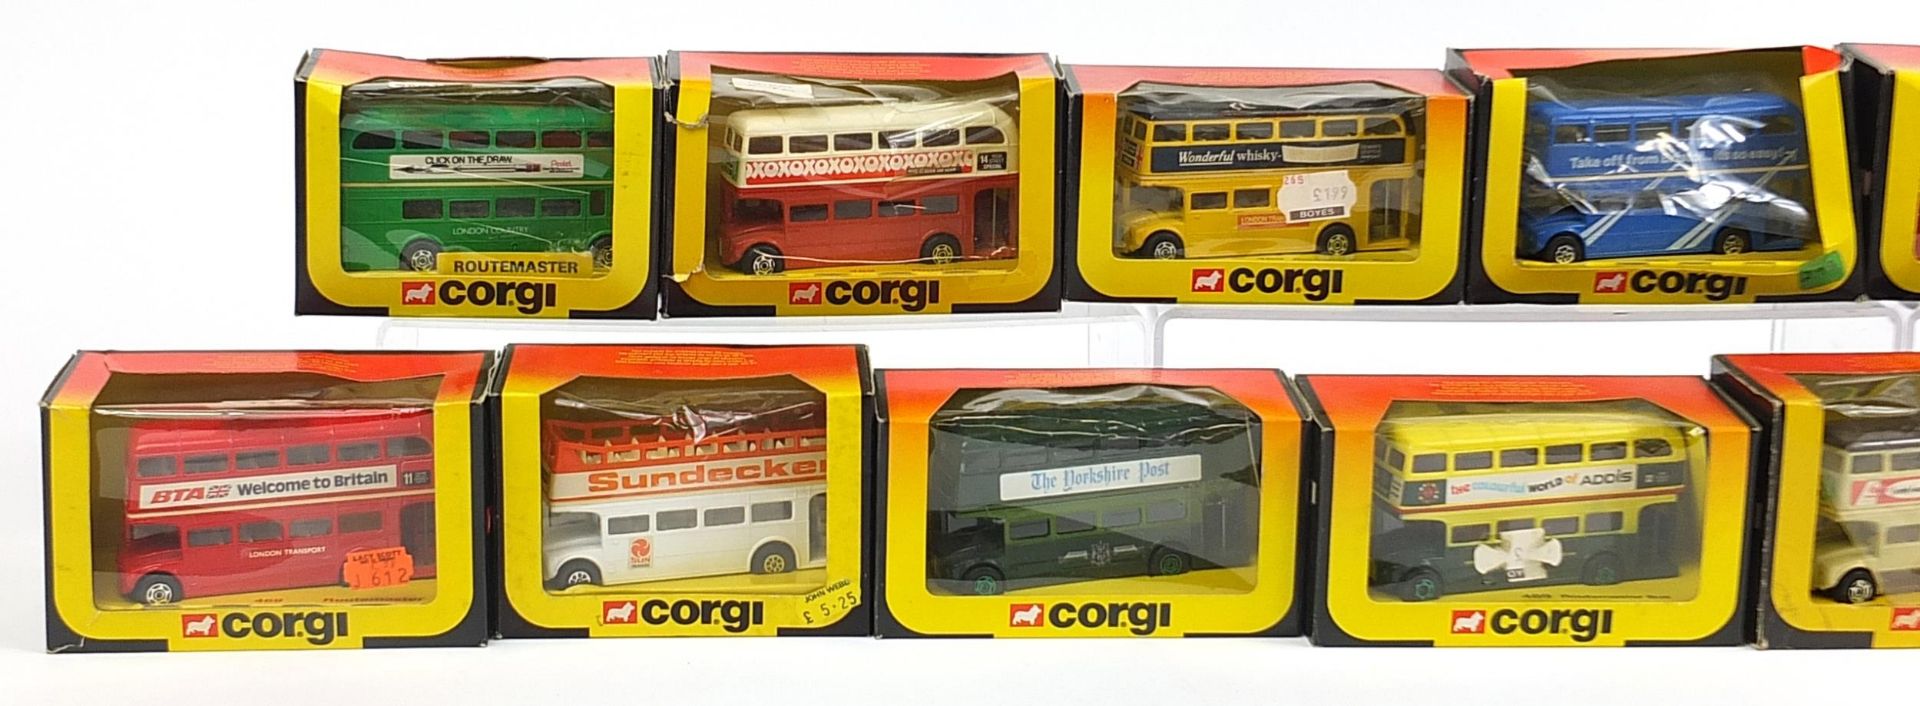 Group of Corgi diecast advertising buses - Image 2 of 3